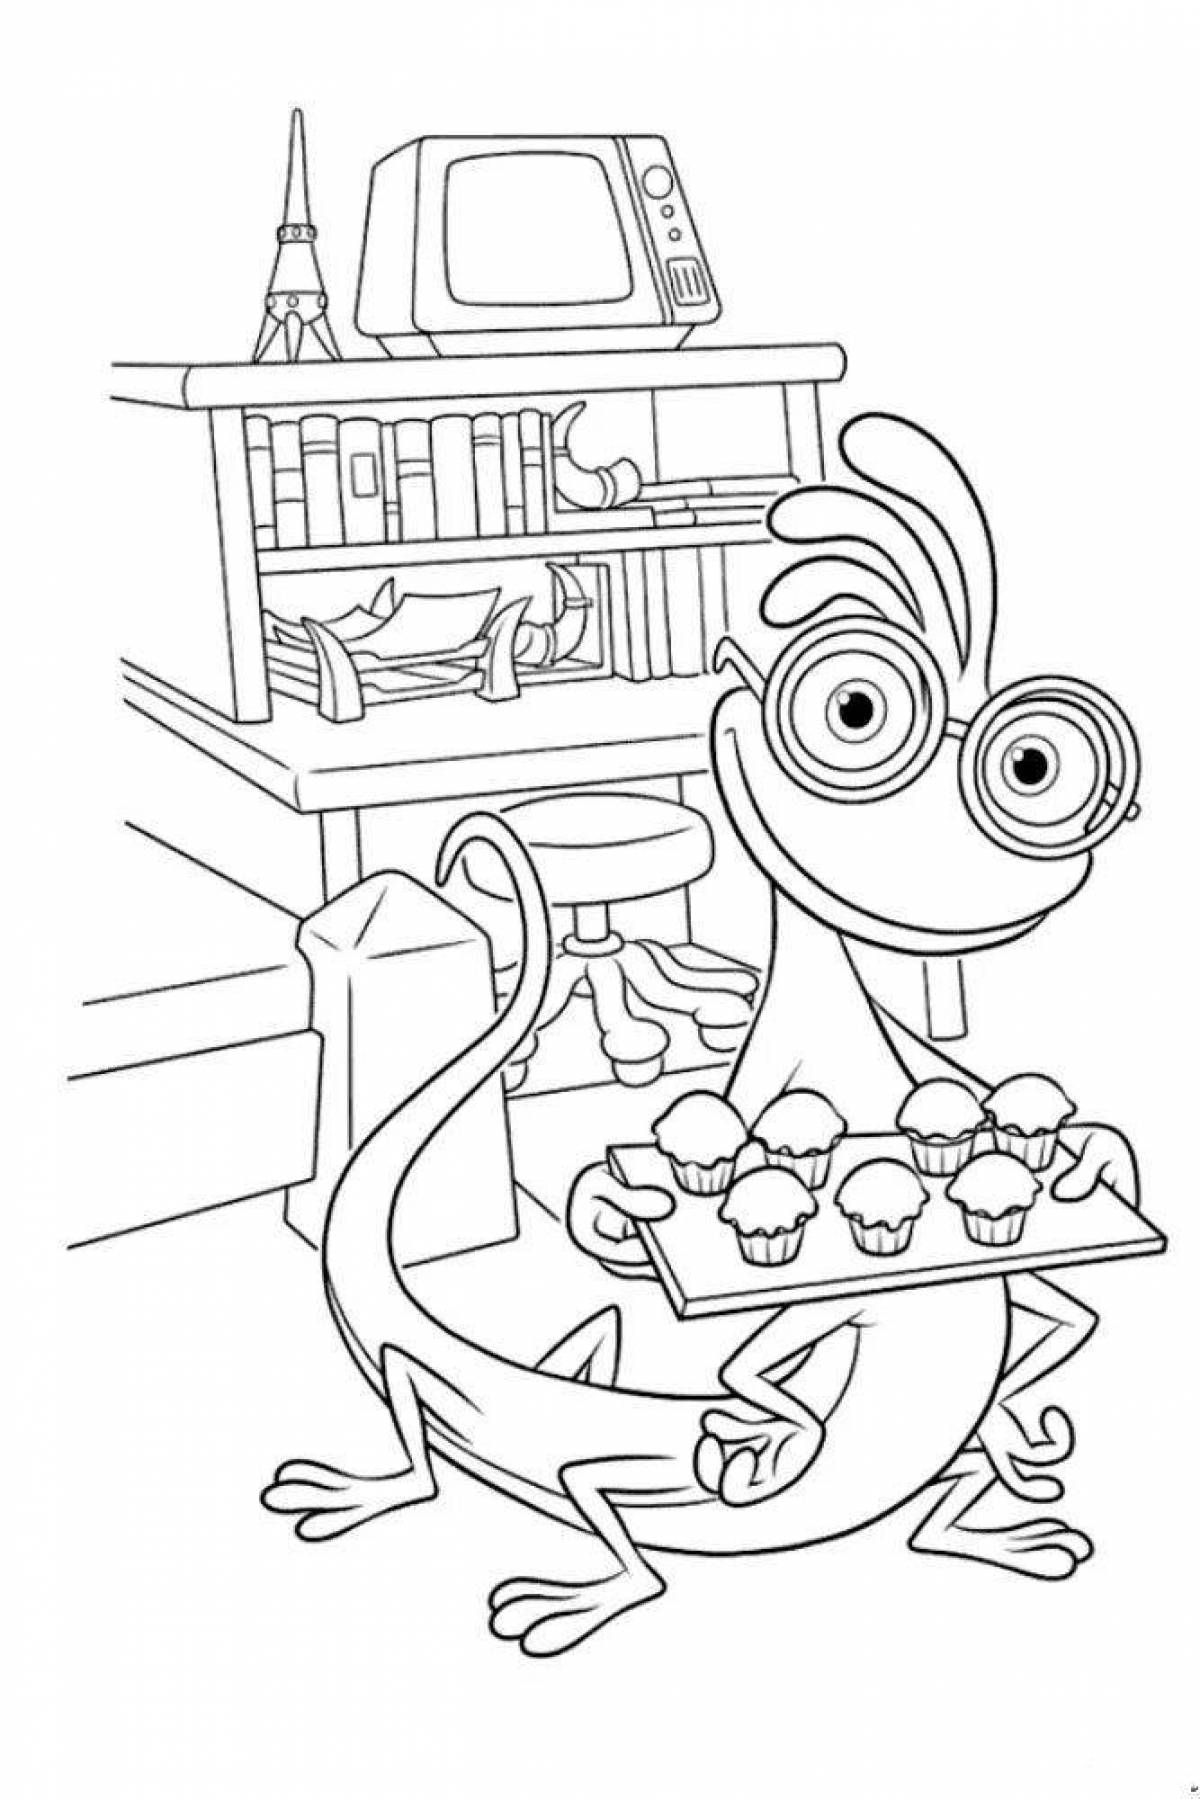 Playful Monsters University coloring page